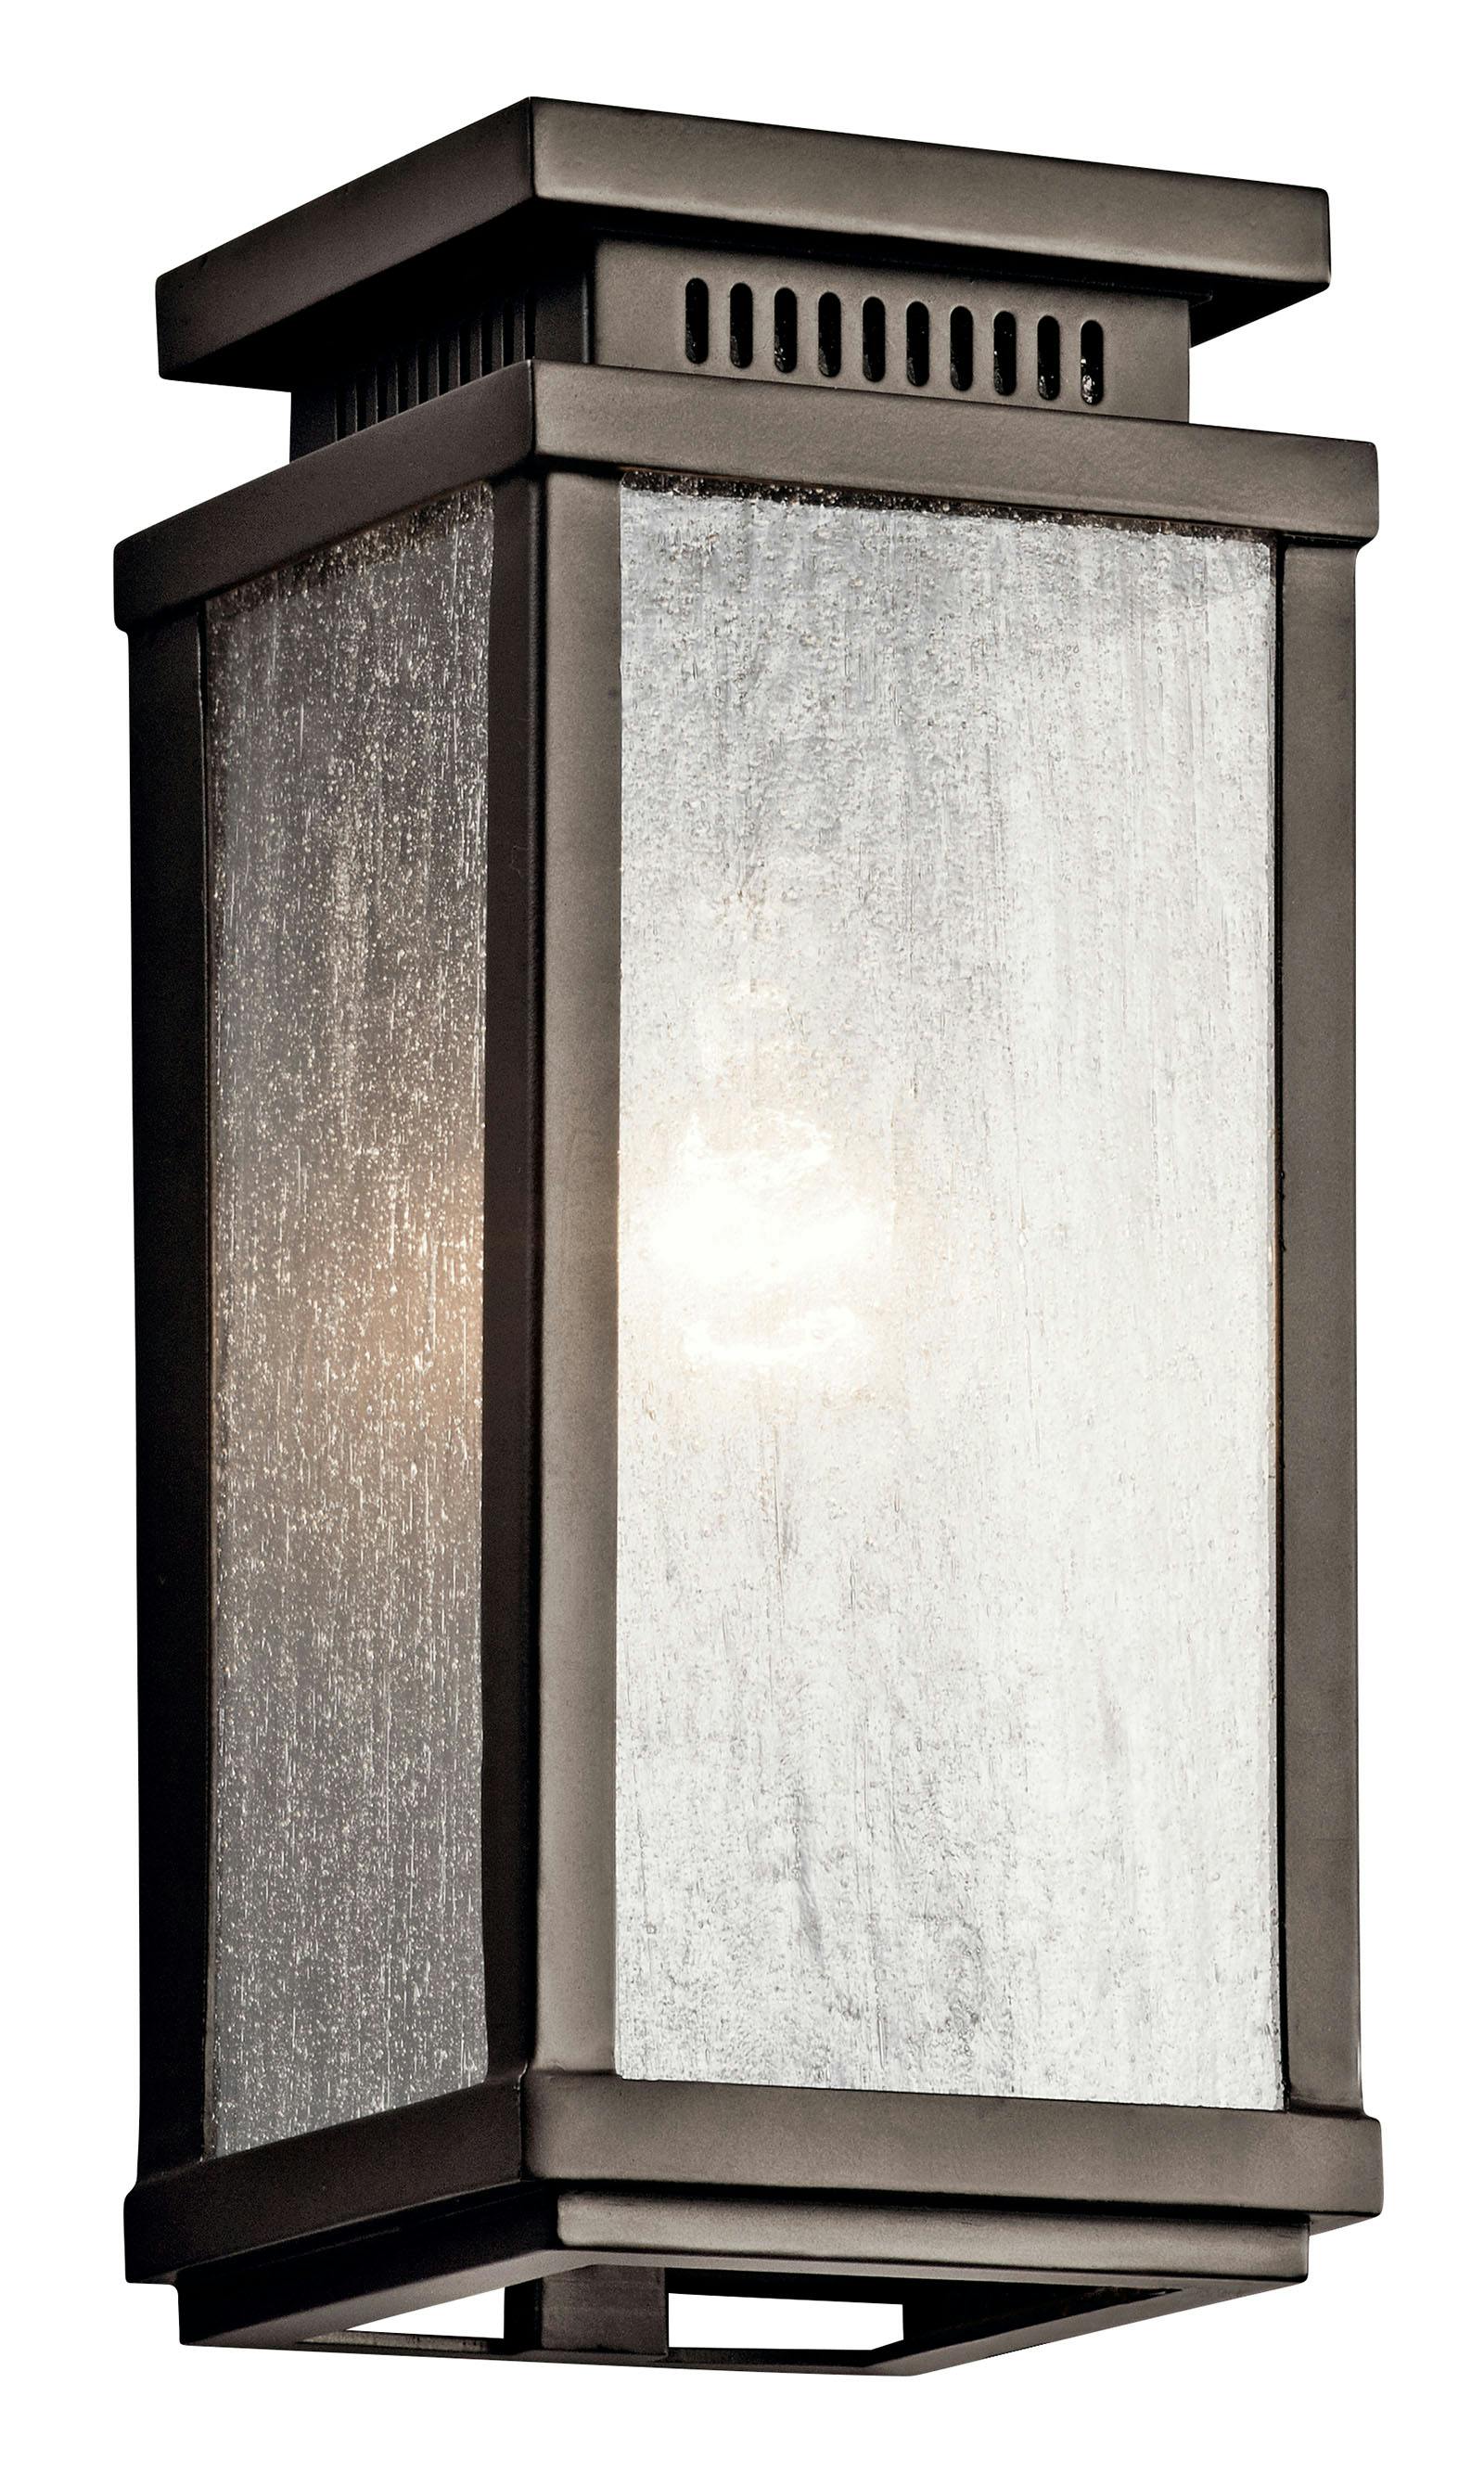 Manningham 10.75" Wall Light Olde Bronze on a white background